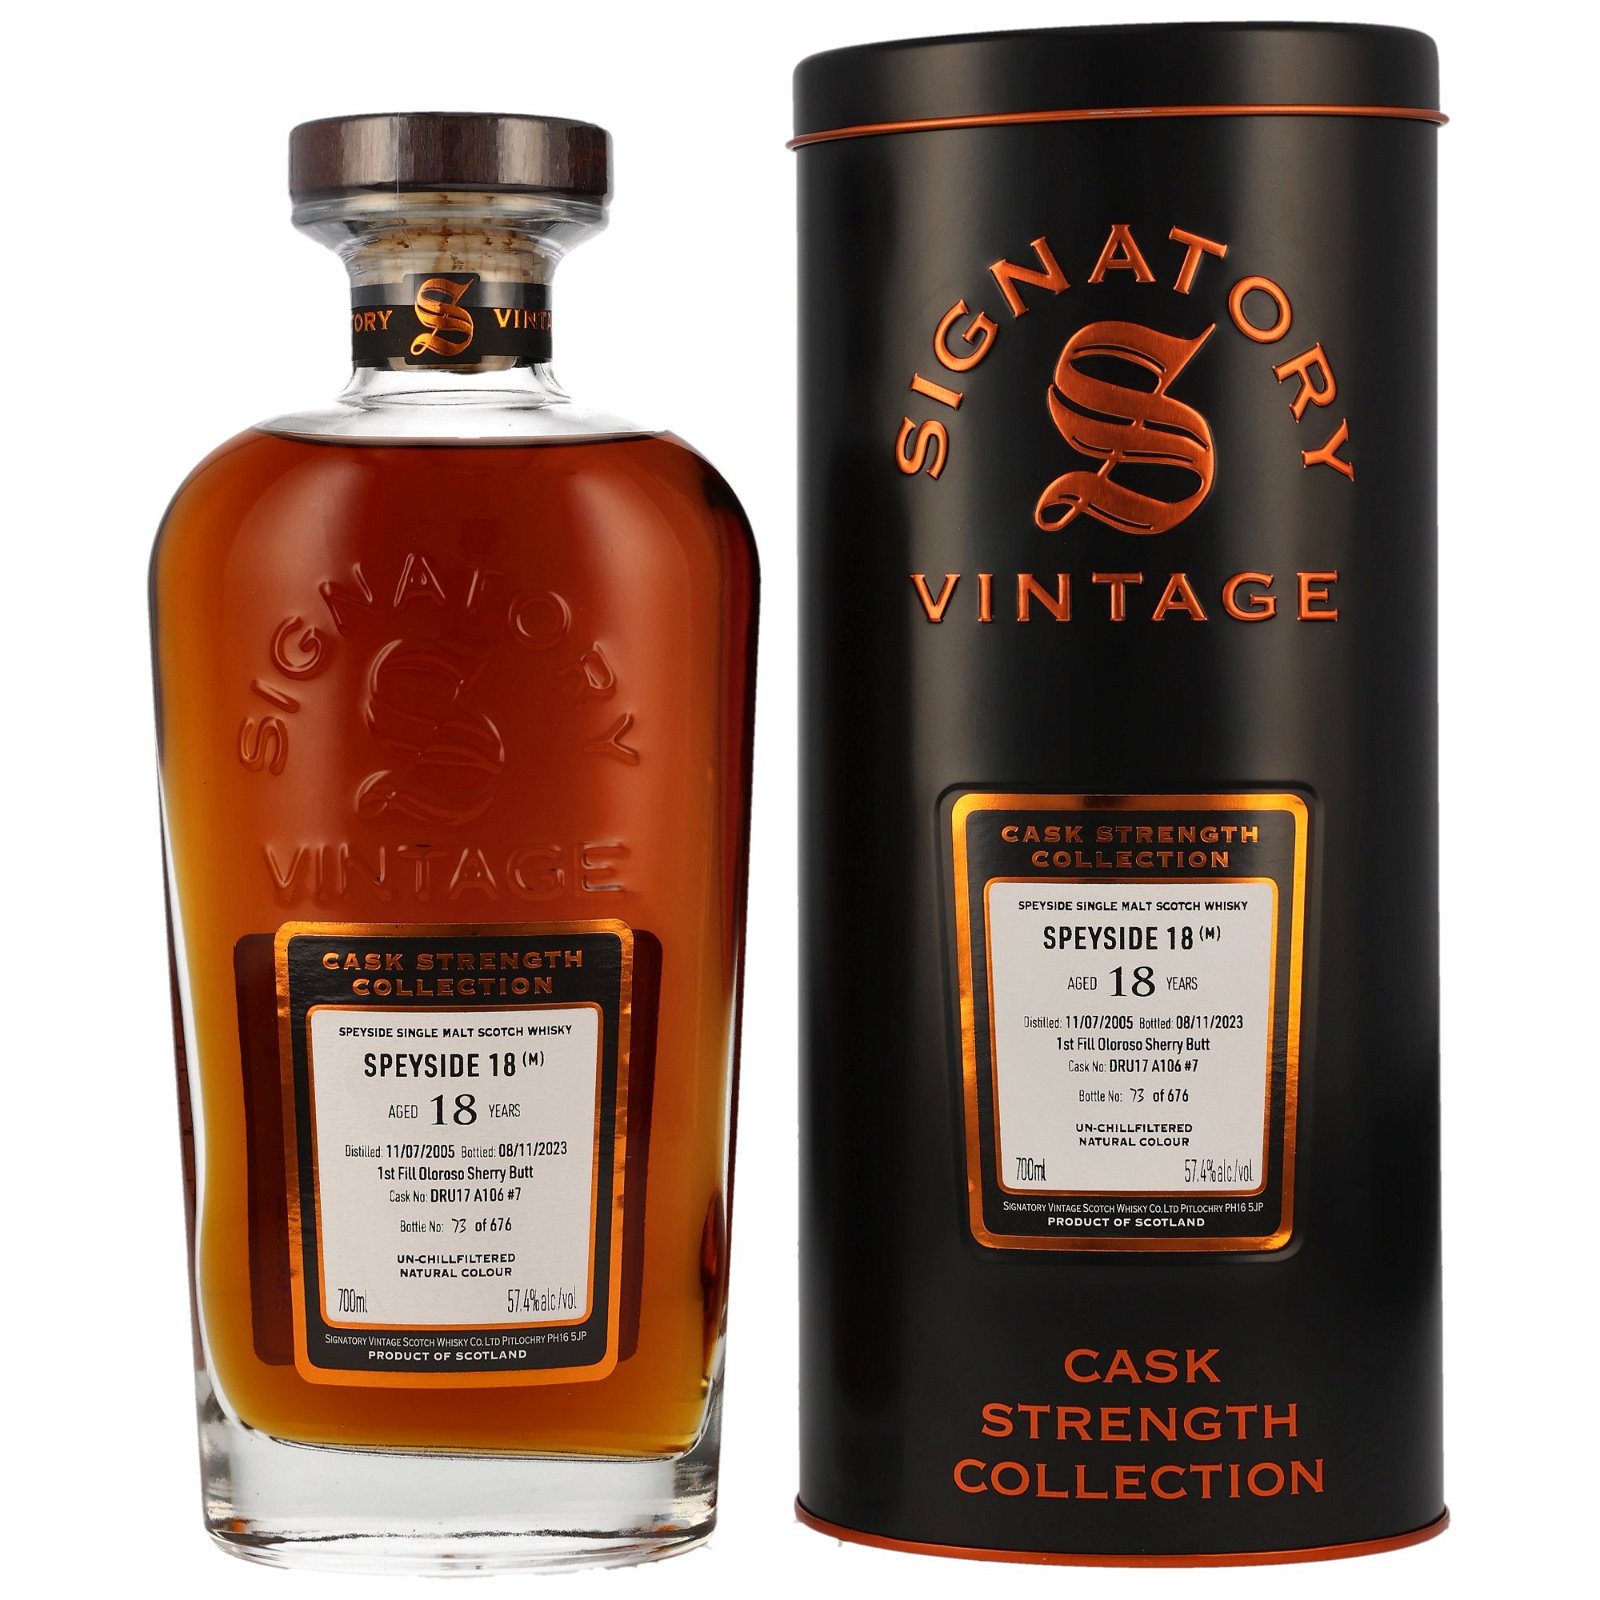 Speyside 18 (M) 2005/2023 - 18 Jahre 1st Fill Oloroso Sherry Butt No. DRU17 A106#7 Cask Strength Collection (Signatory)